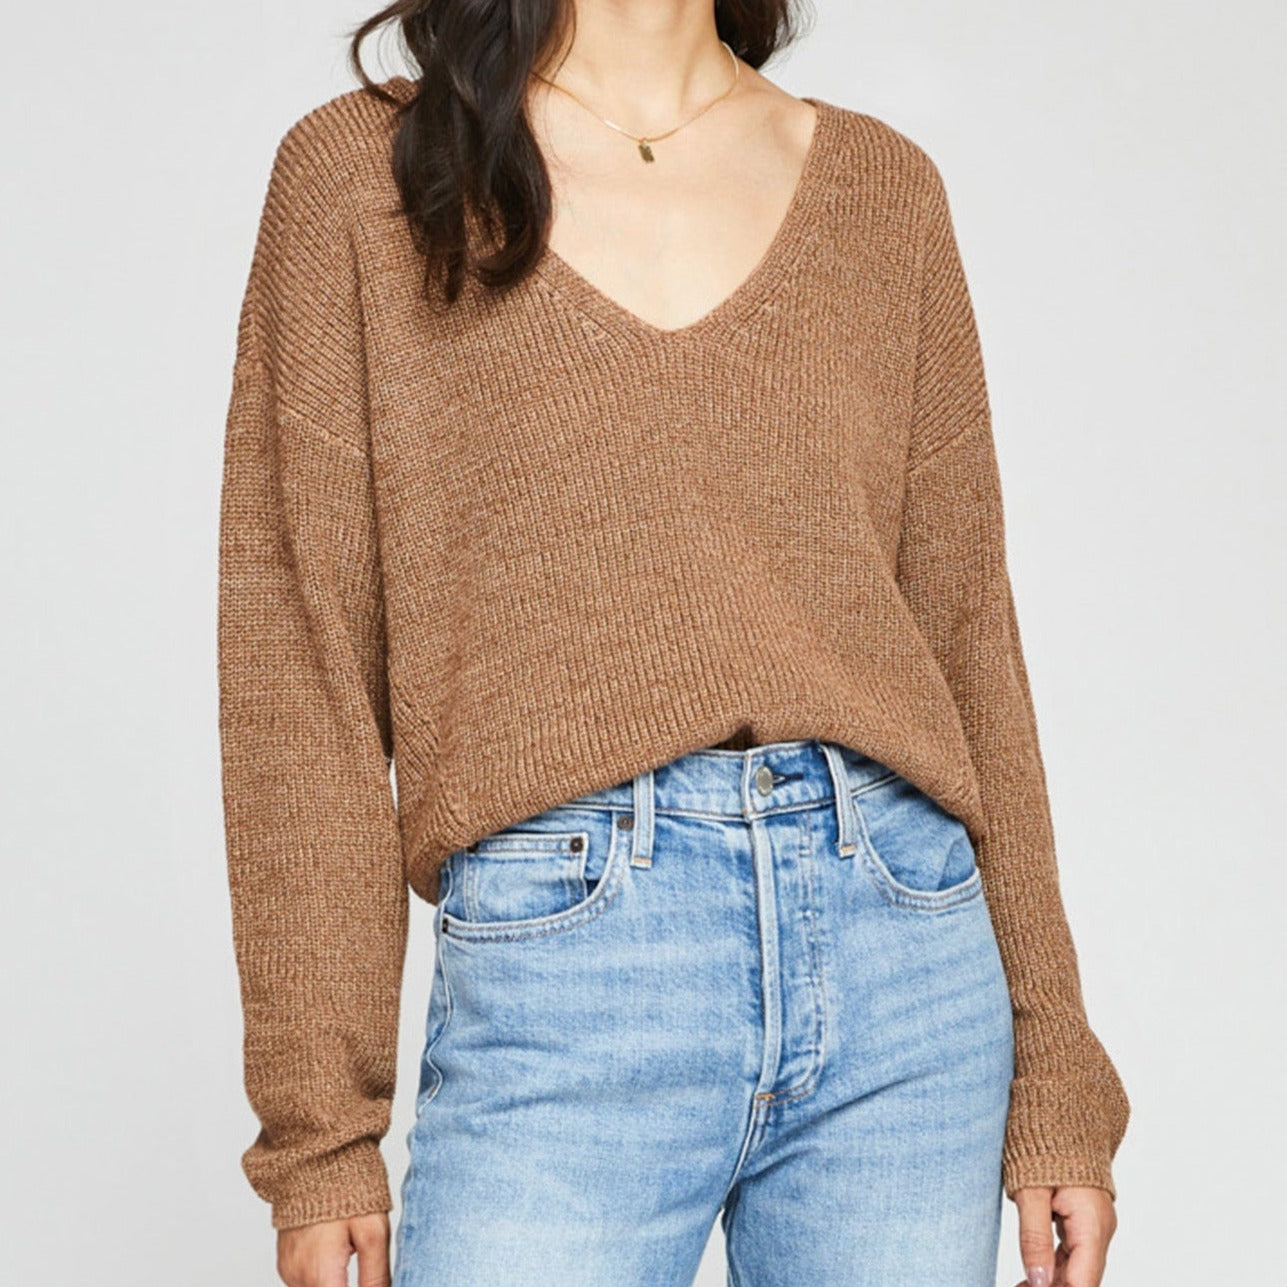 Woman waring a relaxed v neck sweater in caramel color with jeans.